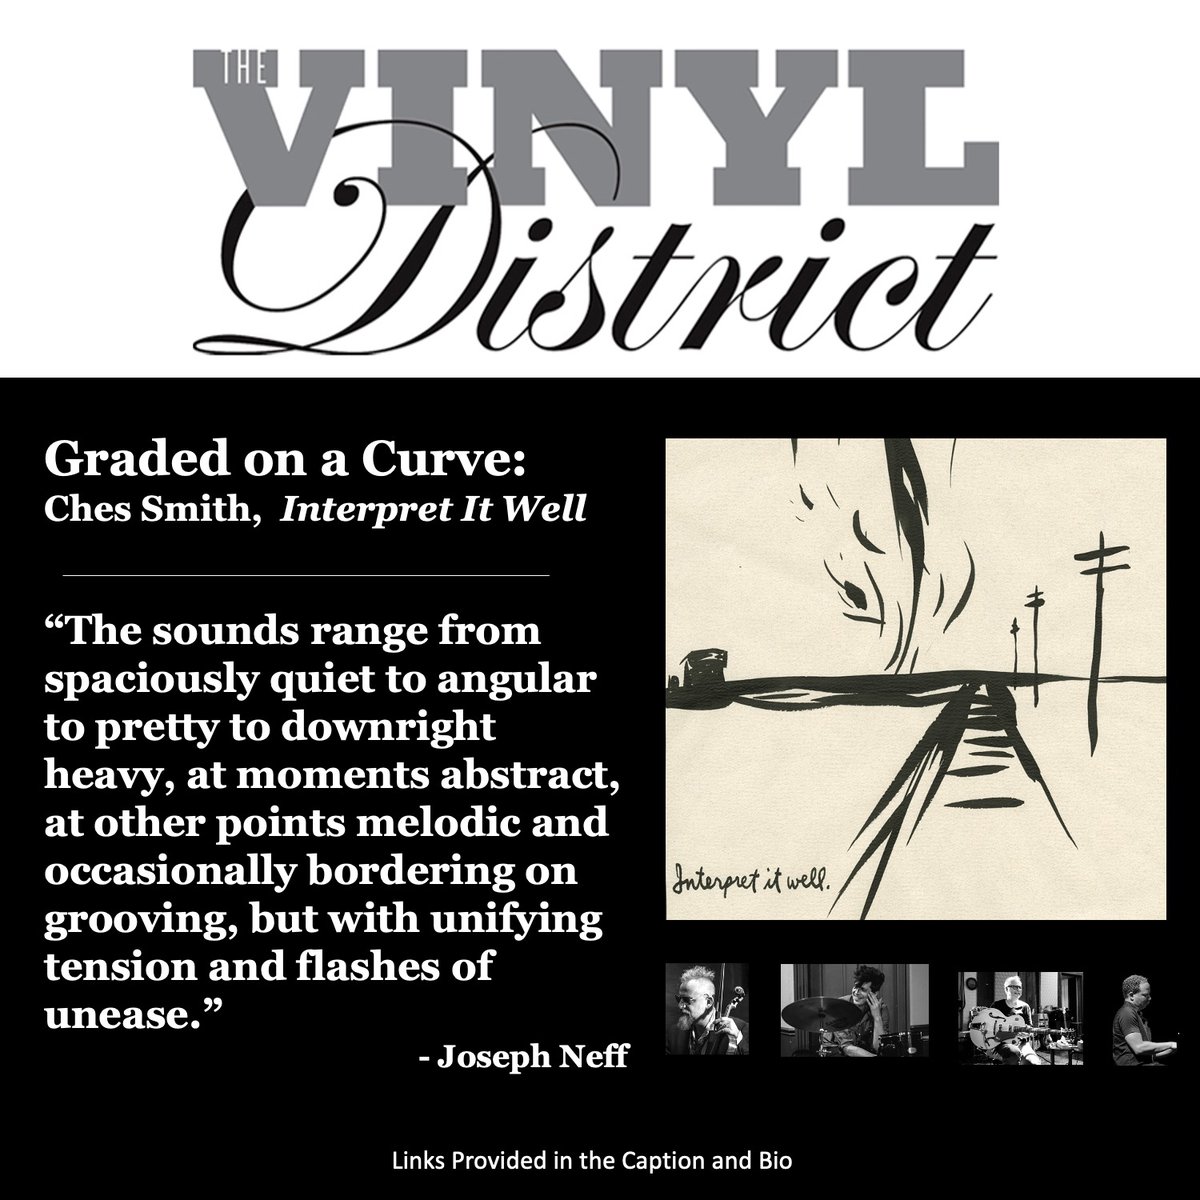 “The sounds range from spaciously quiet to angular to pretty to downright heavy, at moments abstract, but with unifying tension and flashes of unease.” - Joseph Neff thevinyldistrict.com/storefront/202…